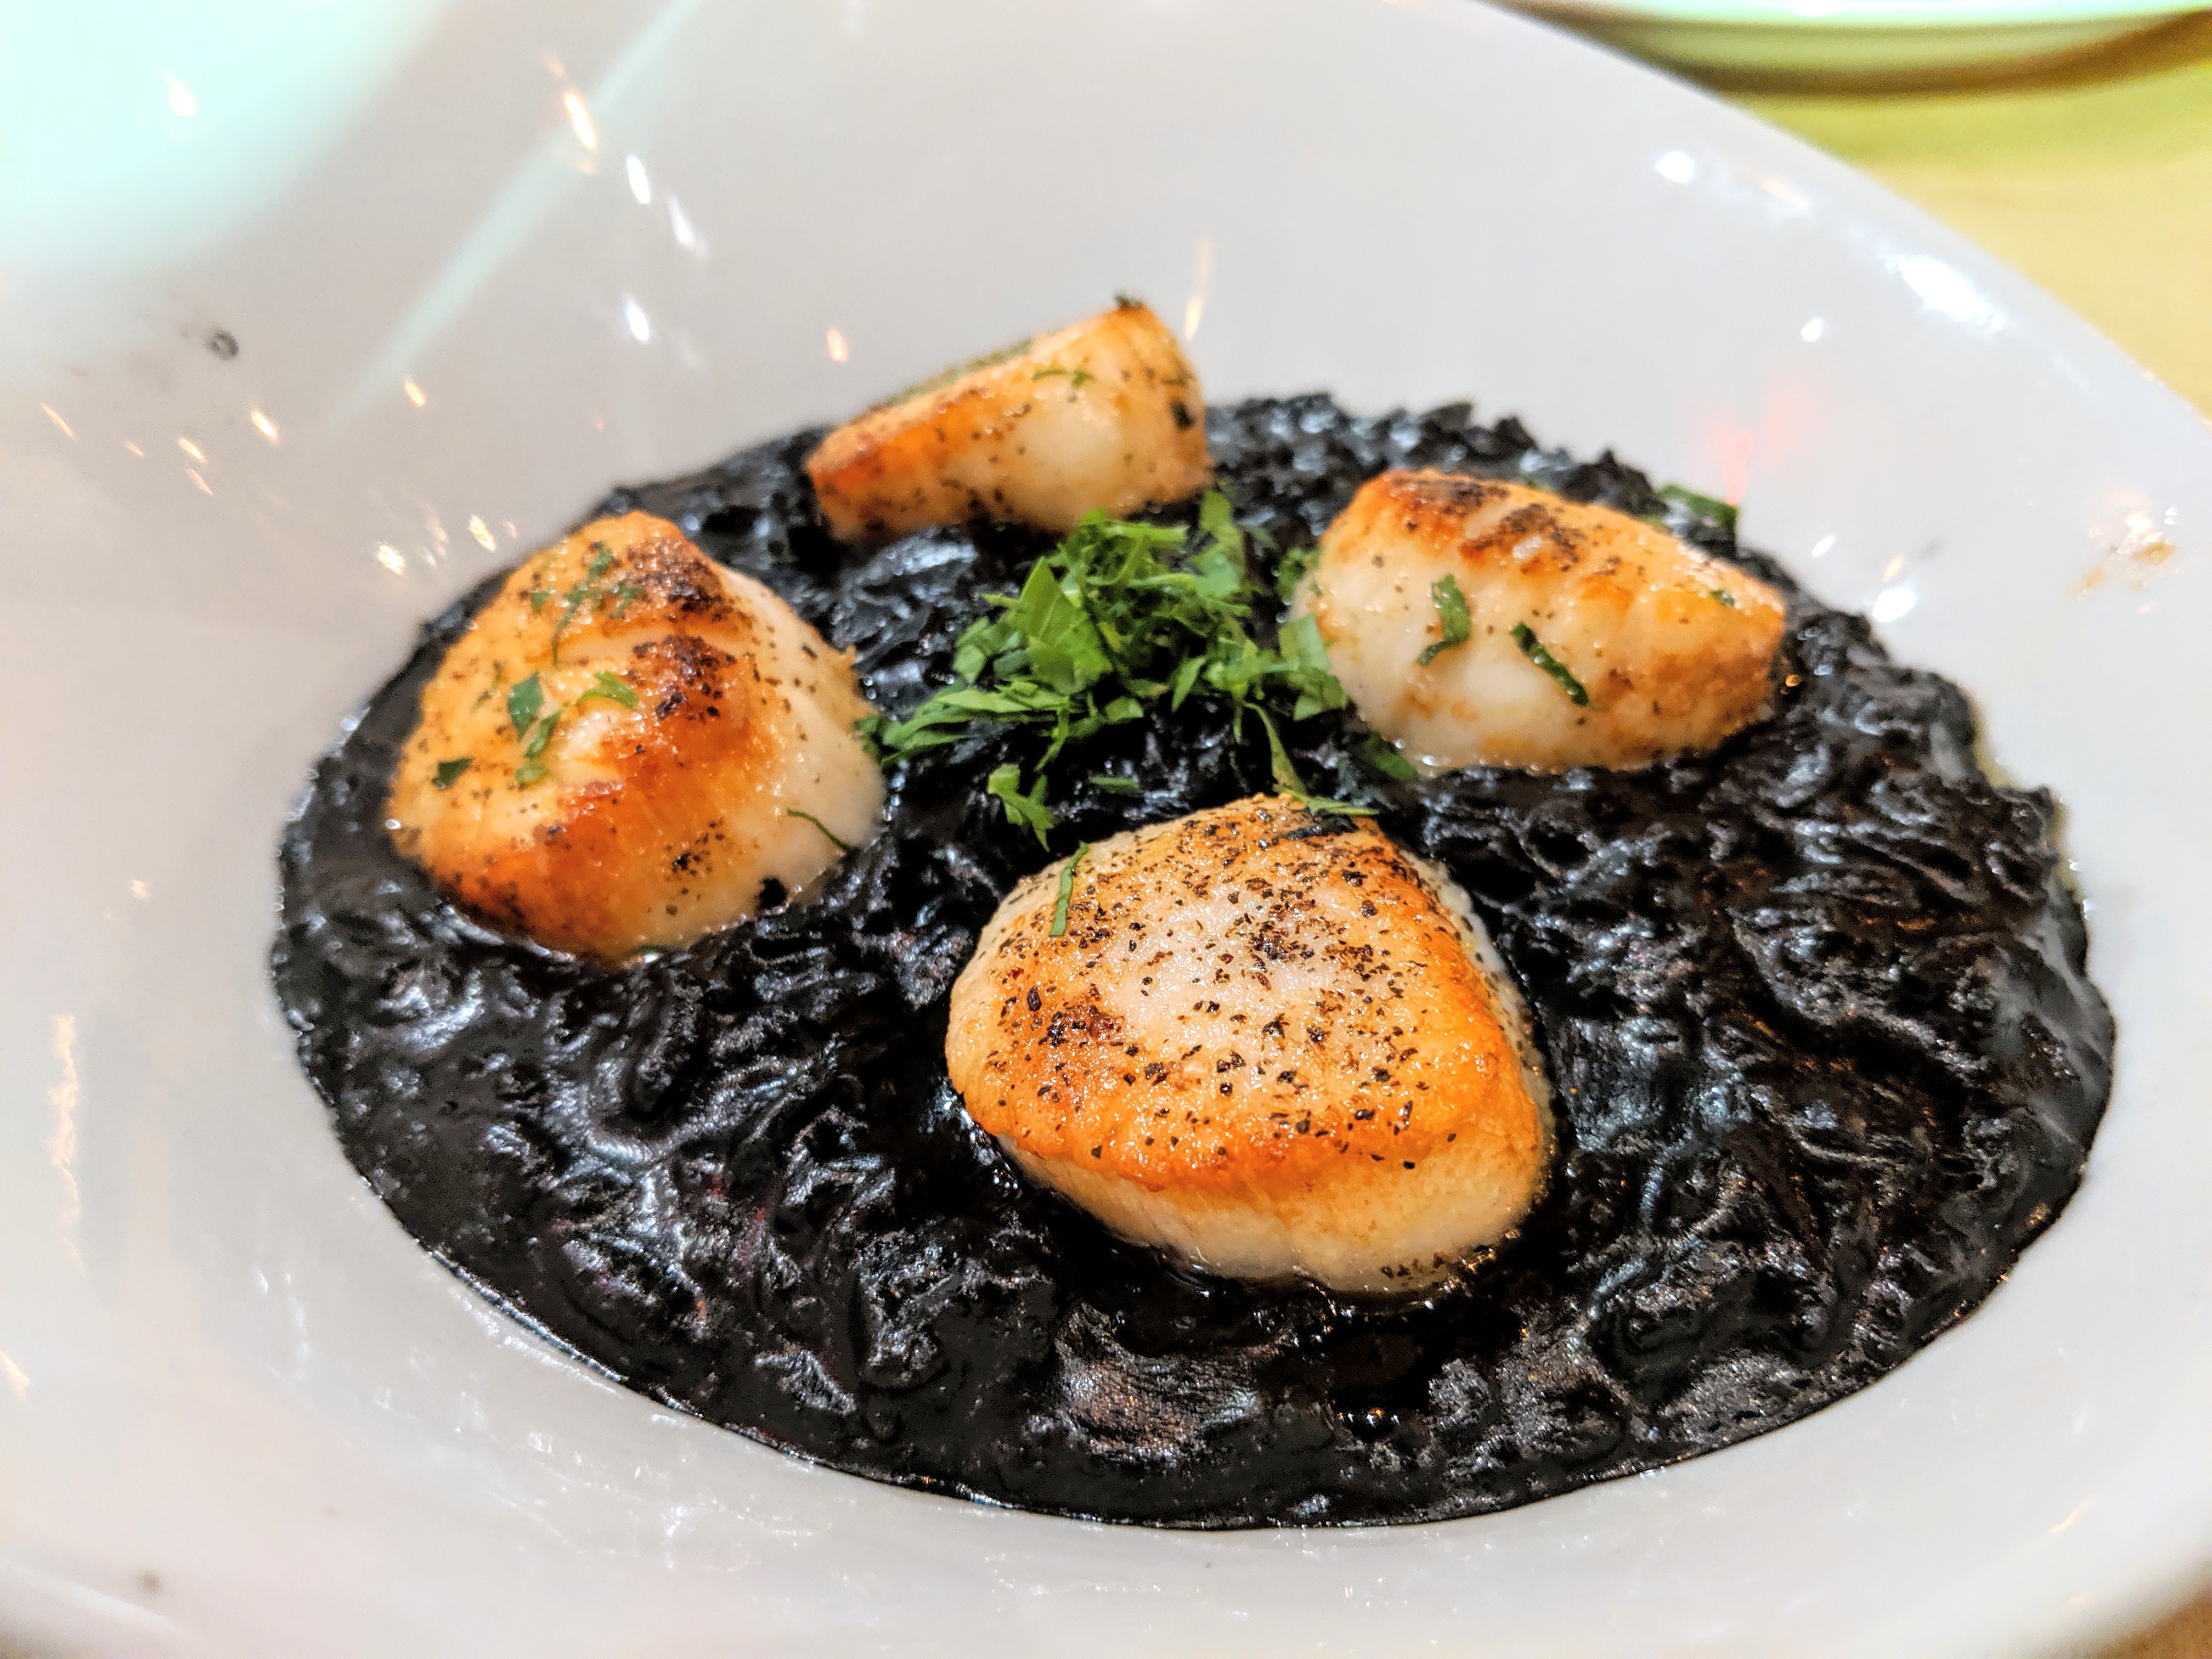 Four pan-seared scallops sit on a bed of black squid ink risotto in a white bowl